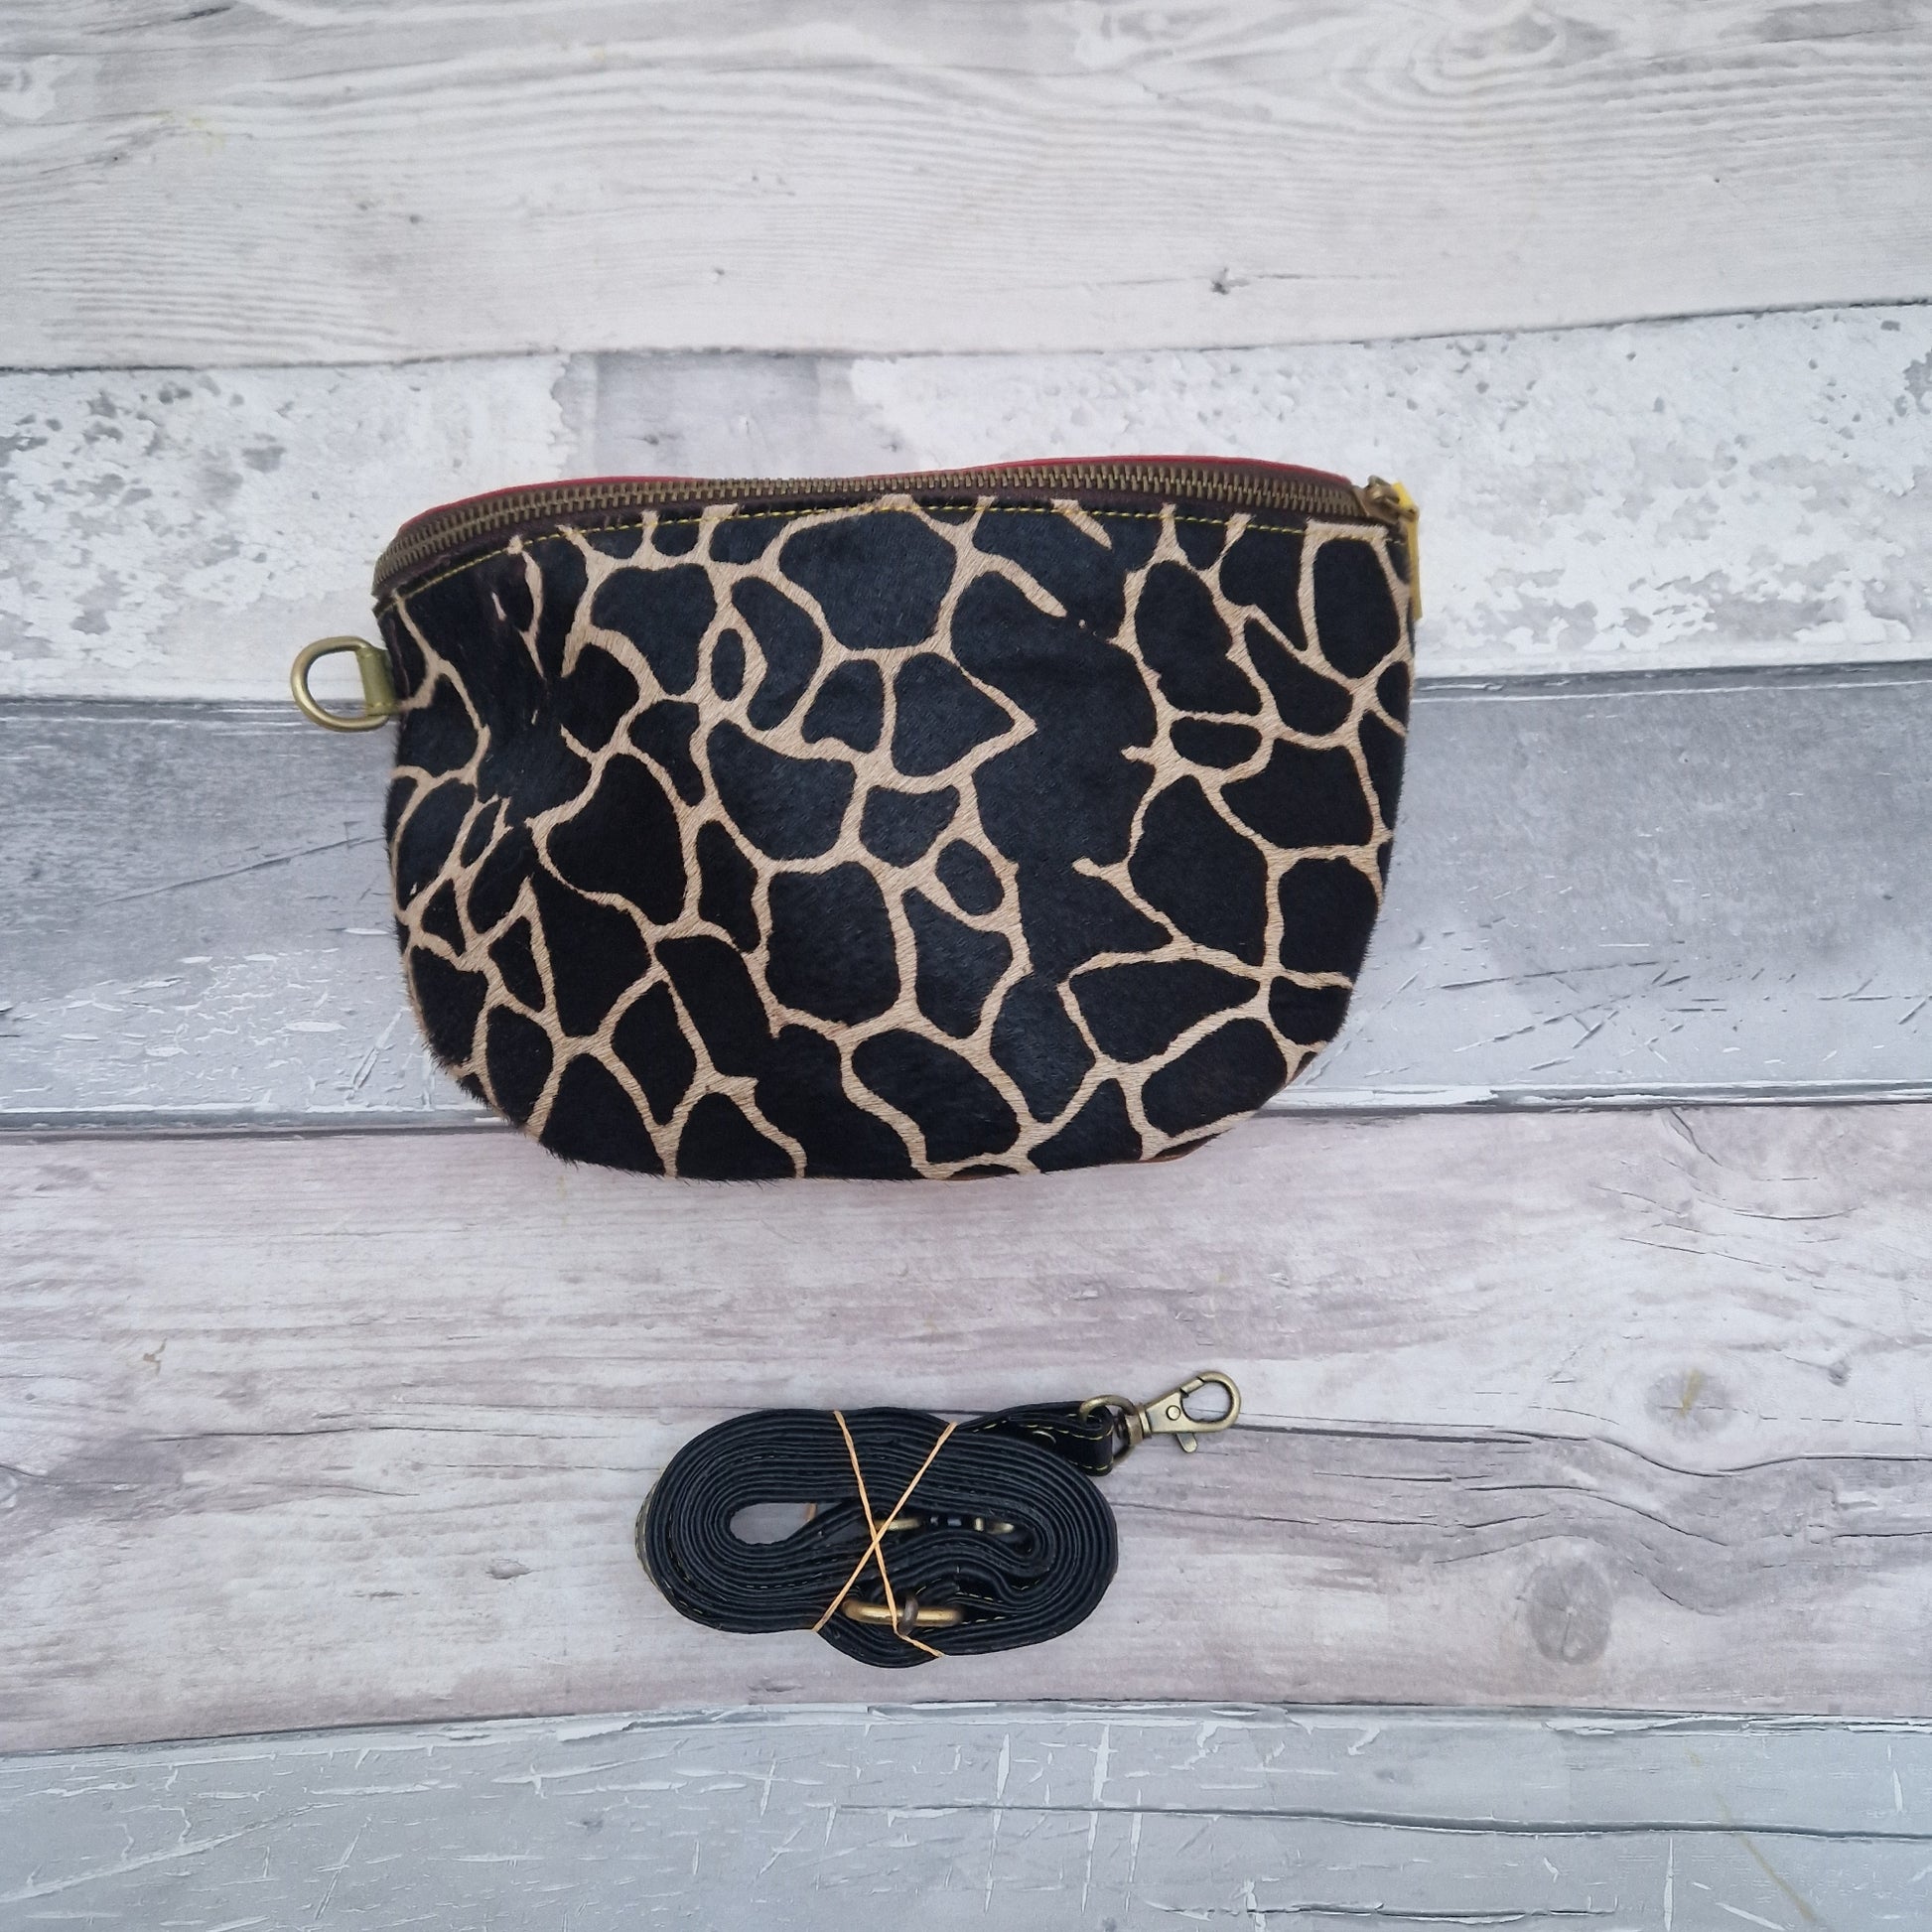 Leather bumbag style bag with a textured front panel in a giraffe print.